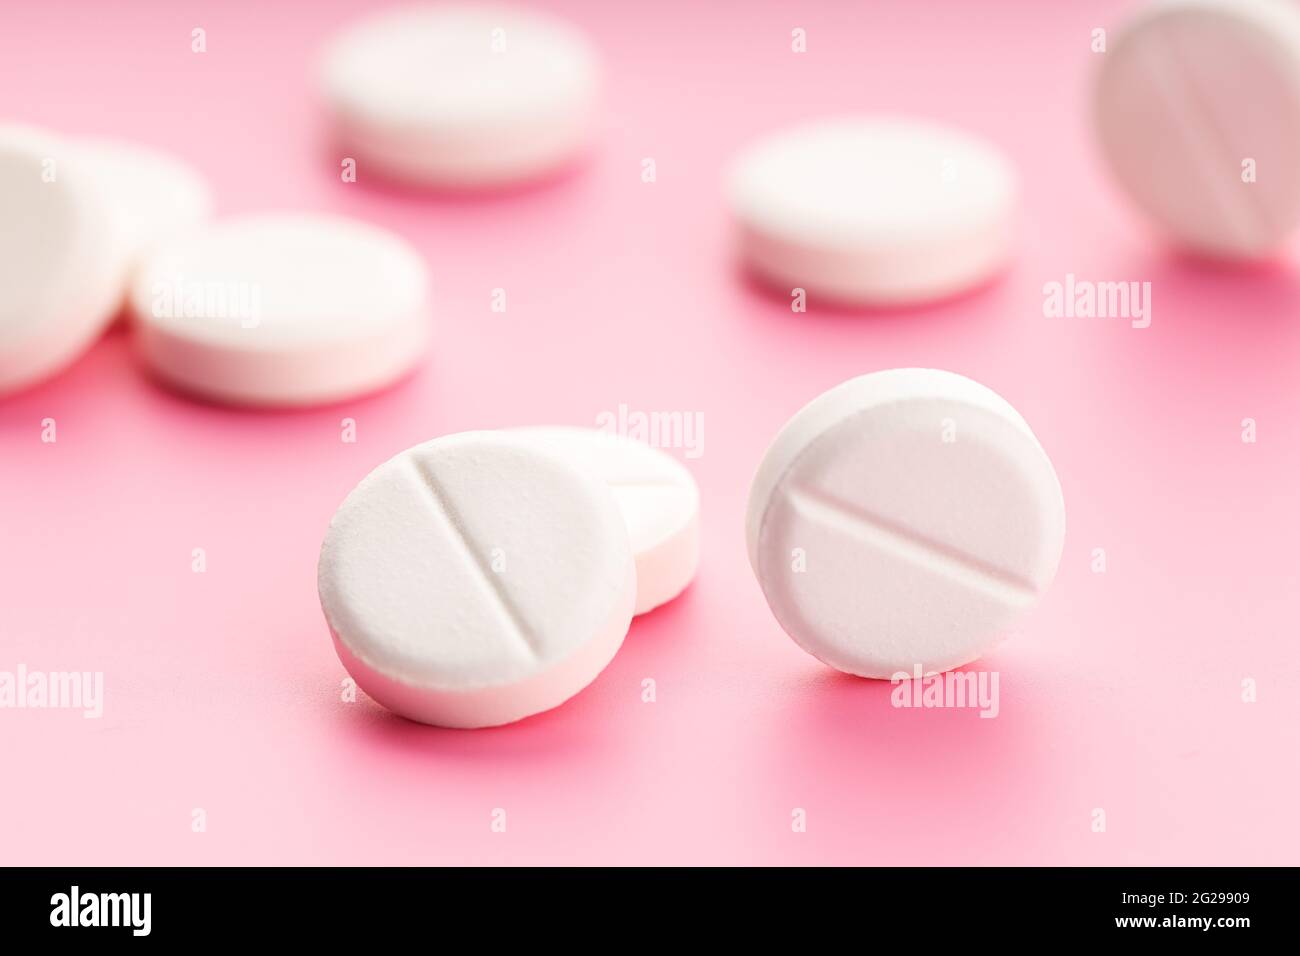 Group of Medicine pills on pink background. Medicine, healthcare and pharmacy concept Stock Photo